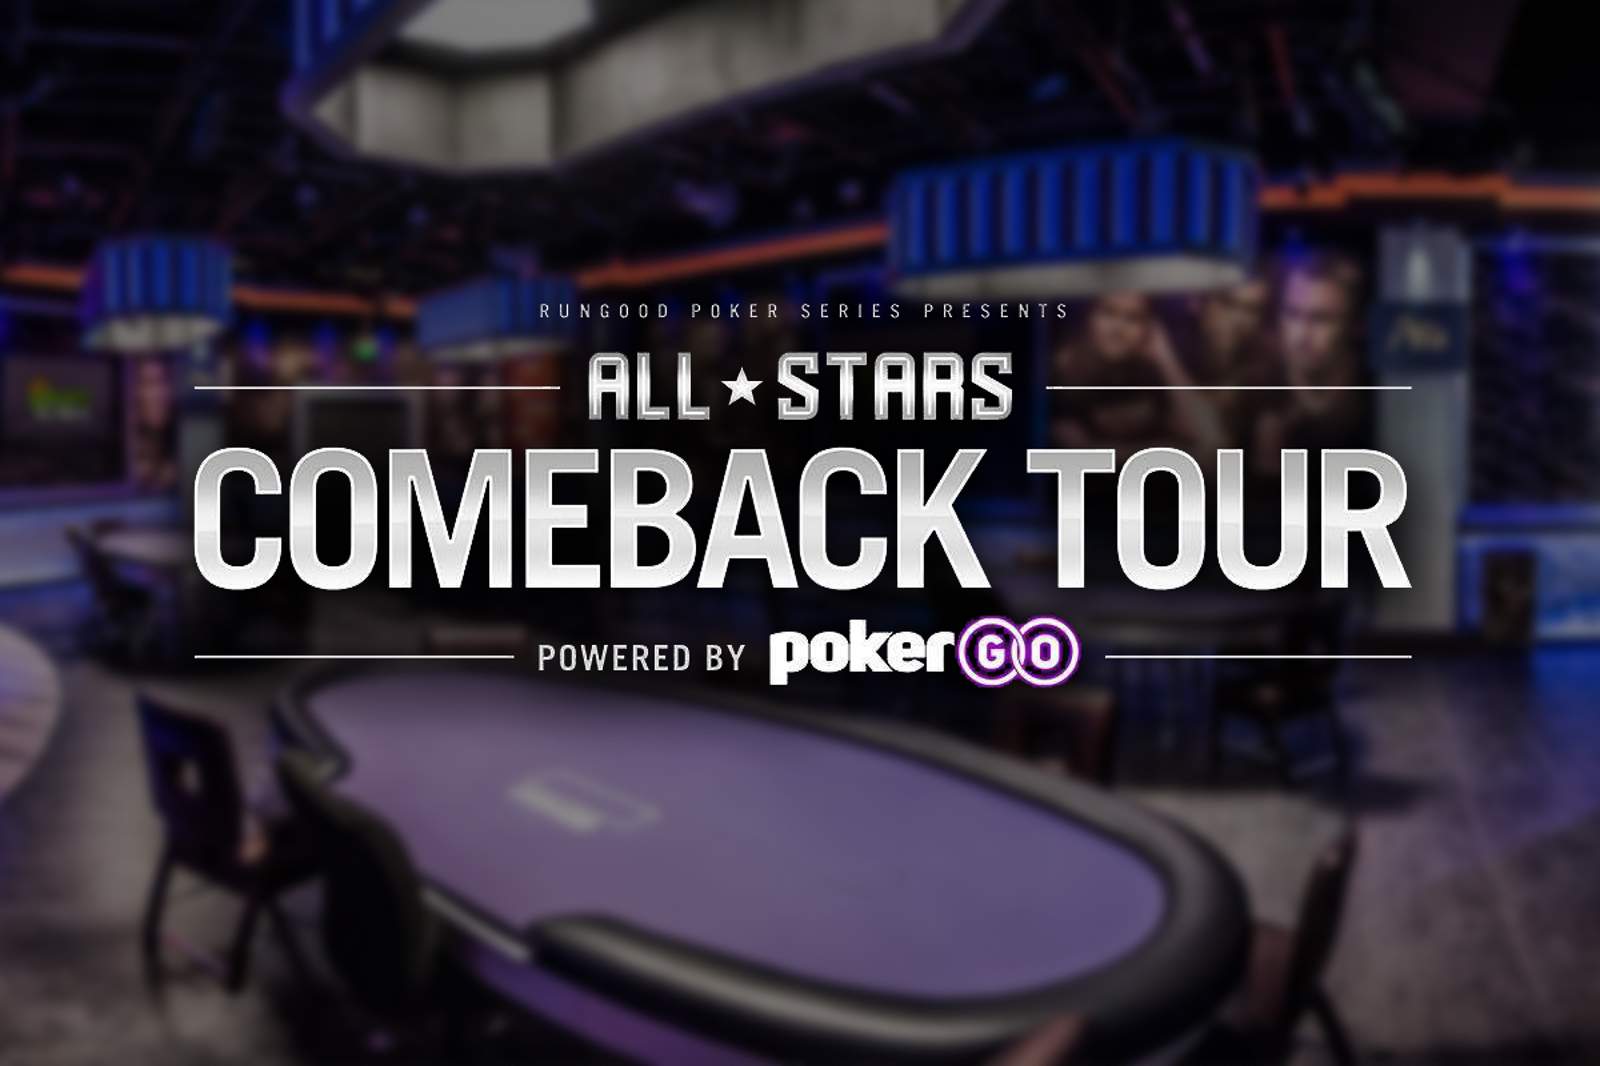 All-Stars Comeback Tour Powered by PokerGO Season Continues in 2021